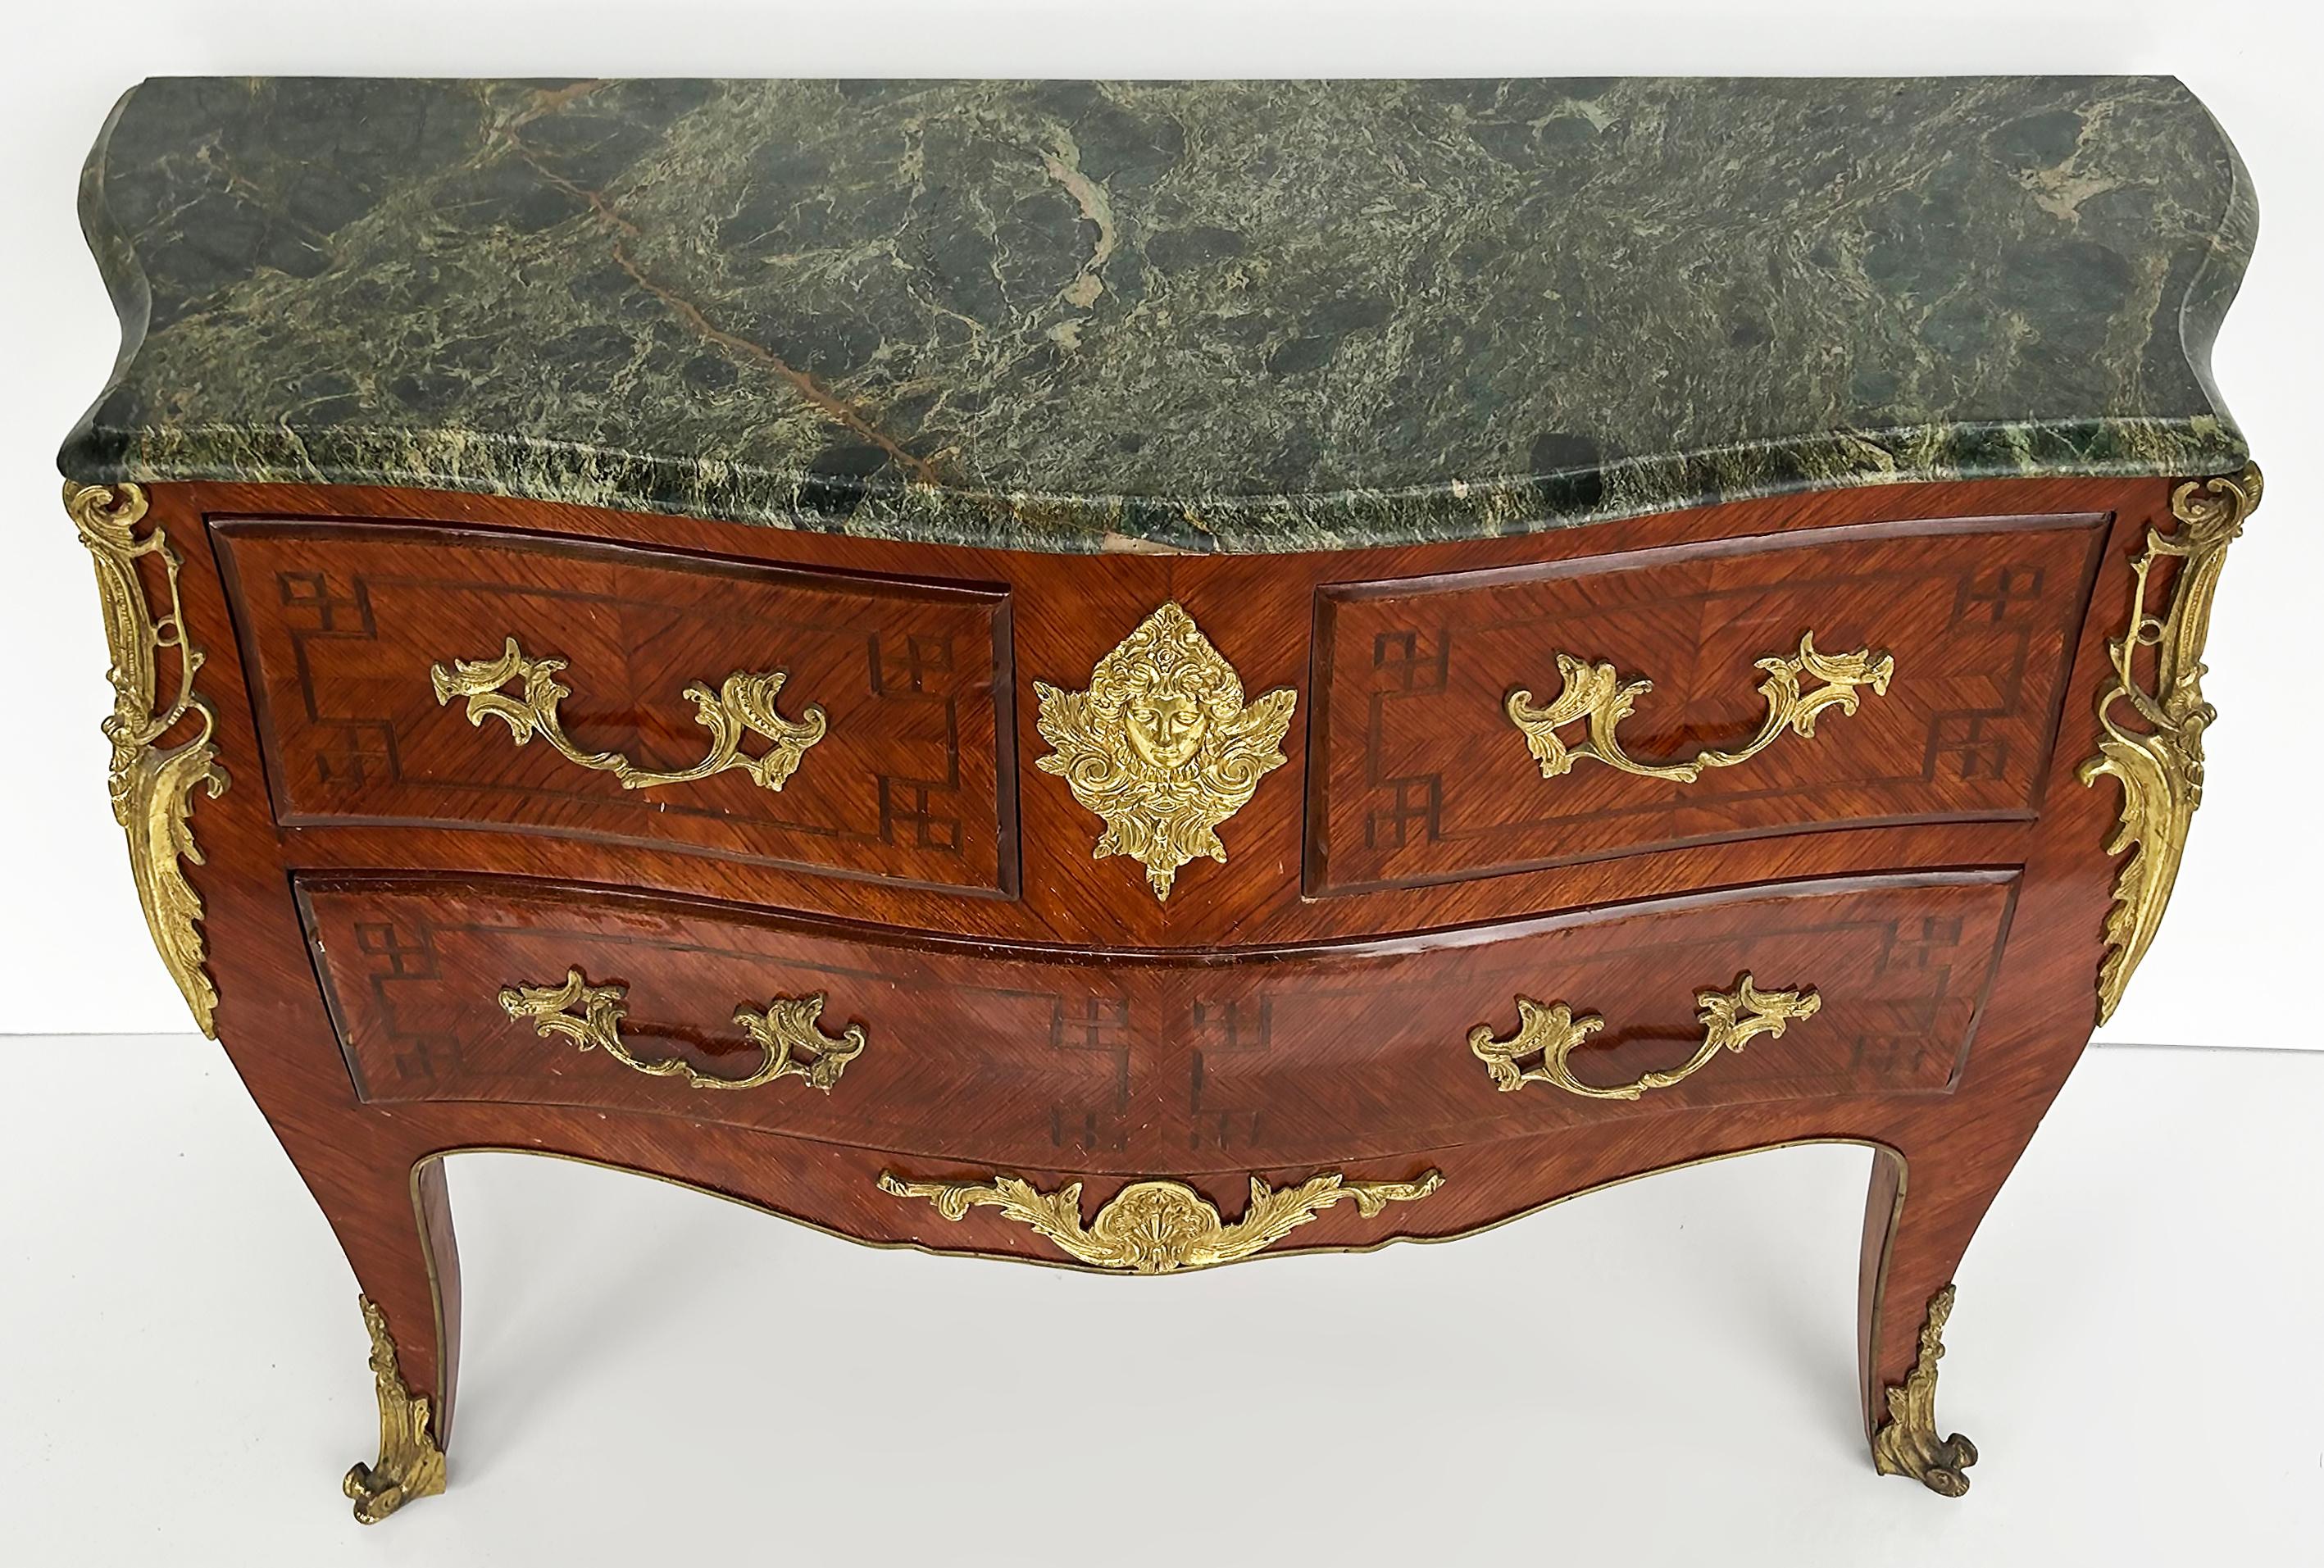 Marble Top Three Drawer Commode with Marquetry and Gilt Bronze Mounts, 20th C

Offered for sale is a marble top three-drawer commode with marquetry and gilt bronze hardware and mounts. This elegant late 20th-century commode has a subtle bow front